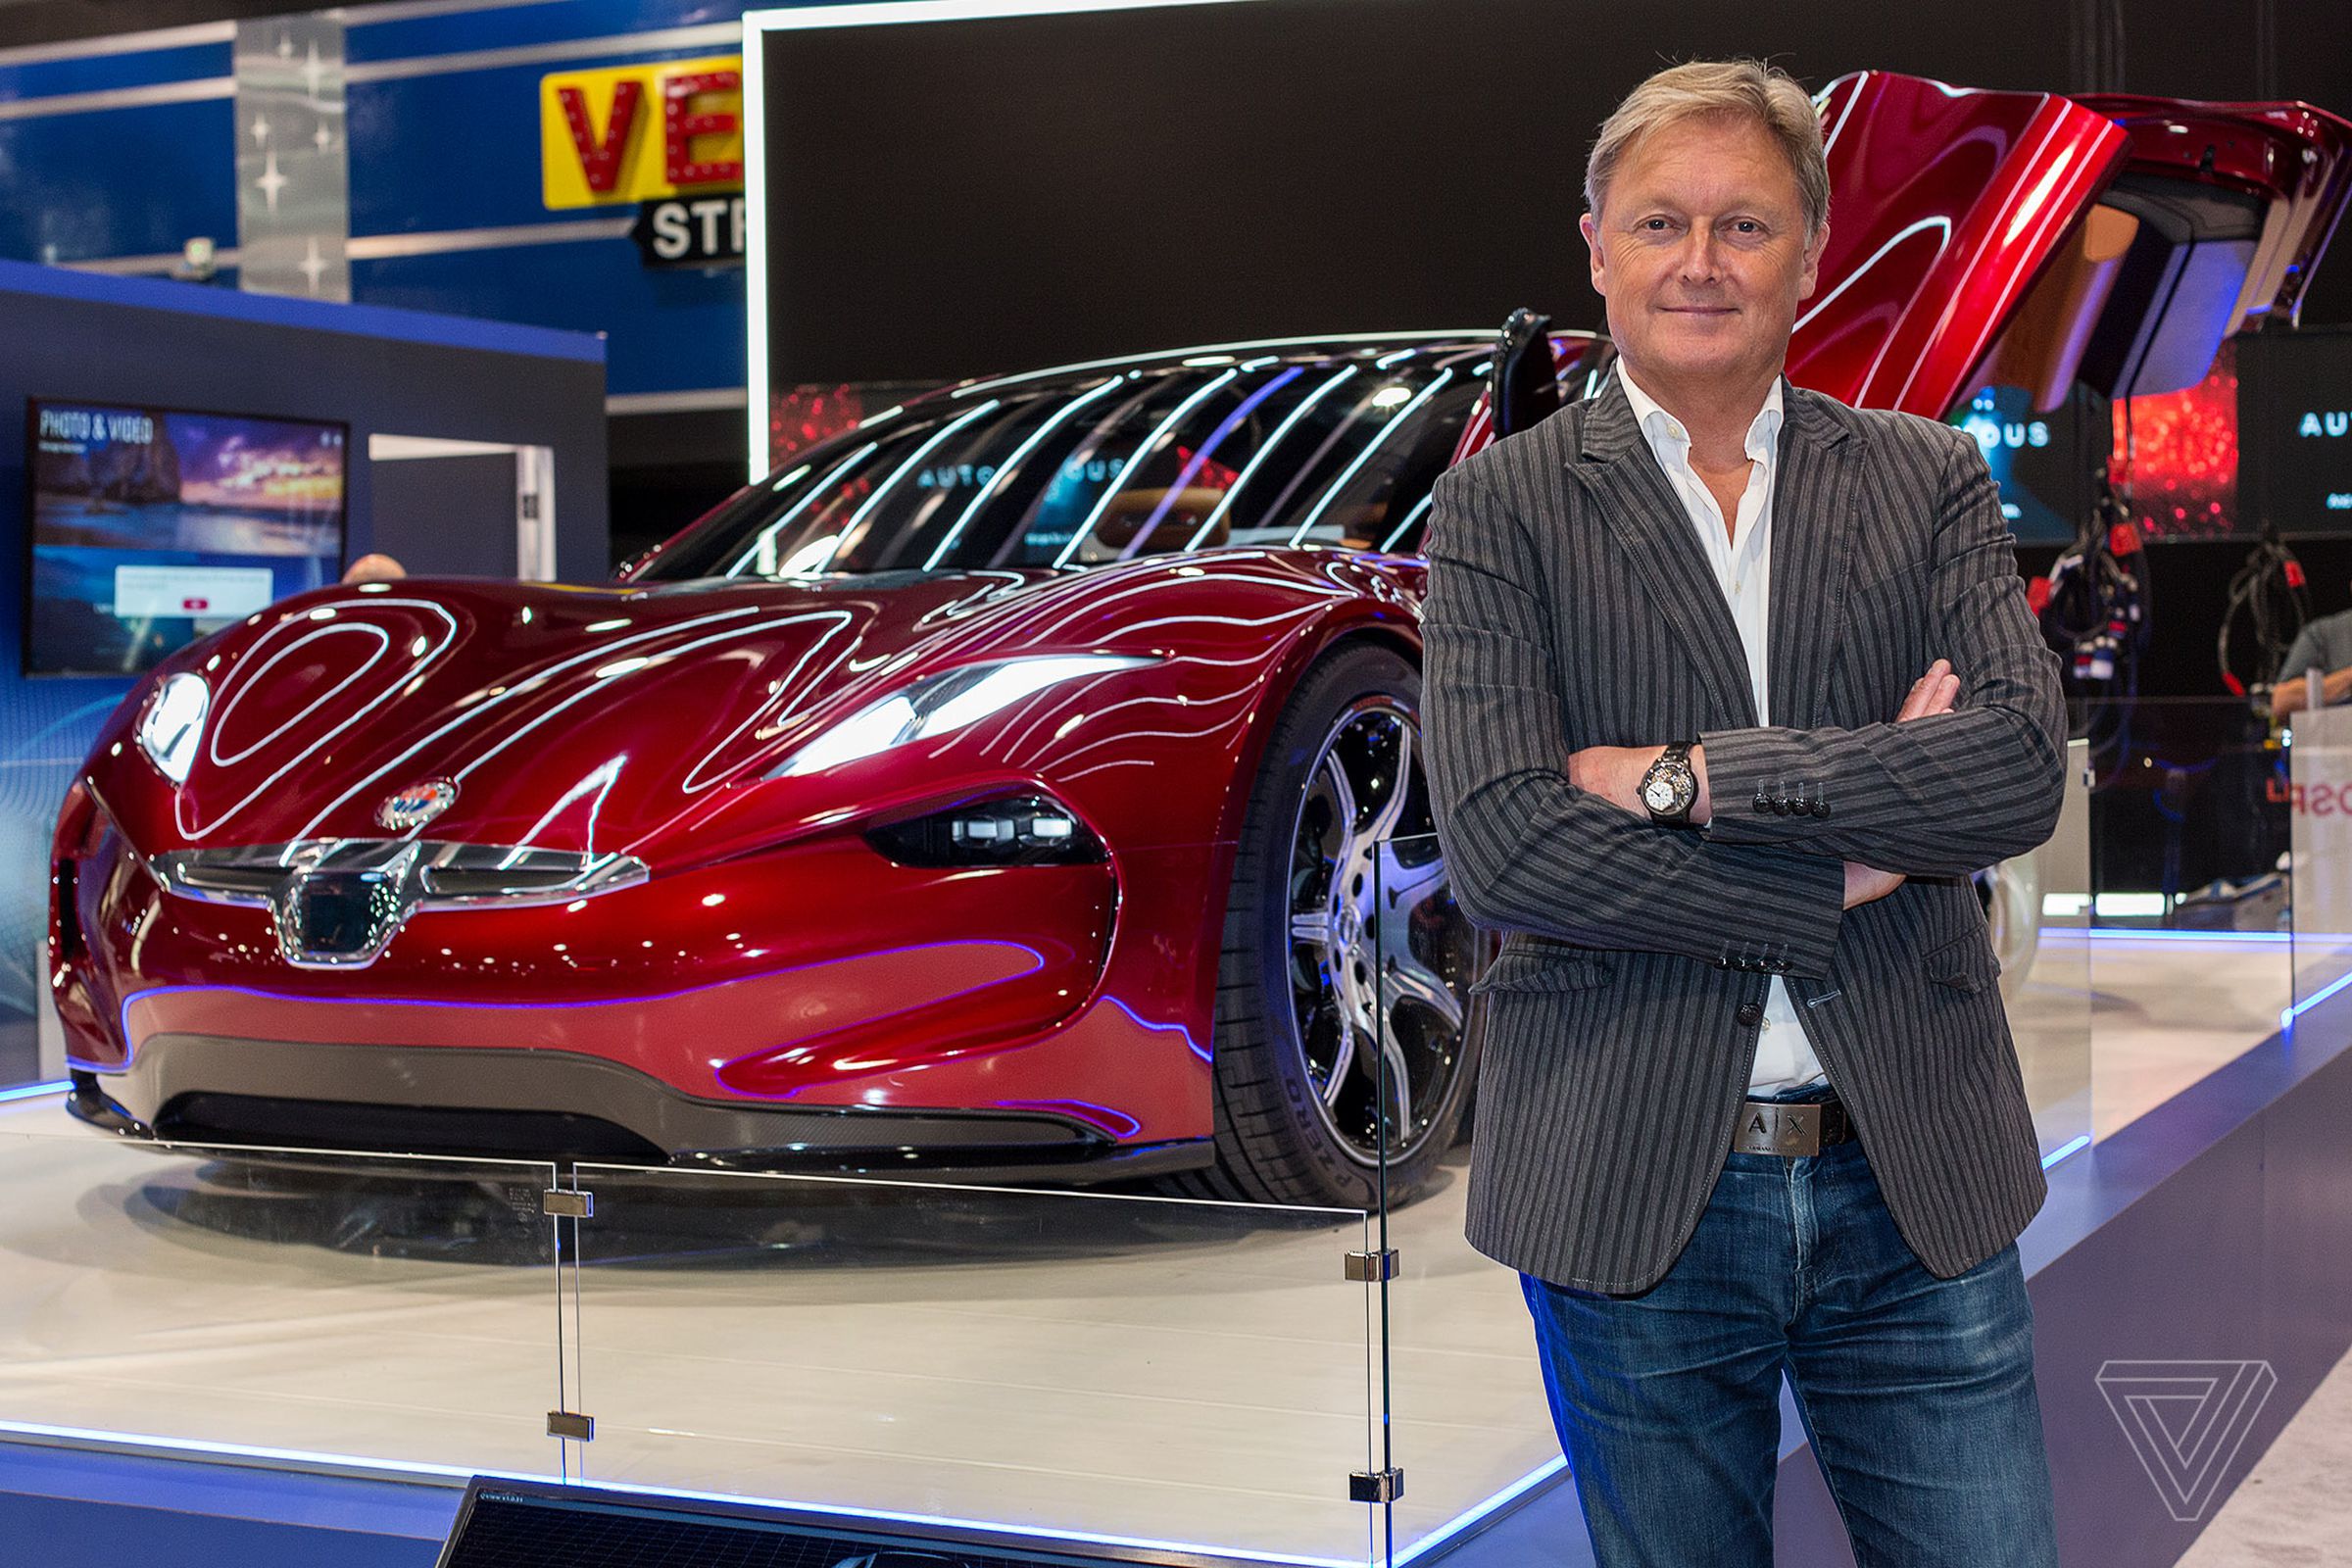 Henrik Fisker stands in front of the EMotion luxury sports car — which was supposed to use solid-state batteries — at the 2018 Consumer Electronics Show.